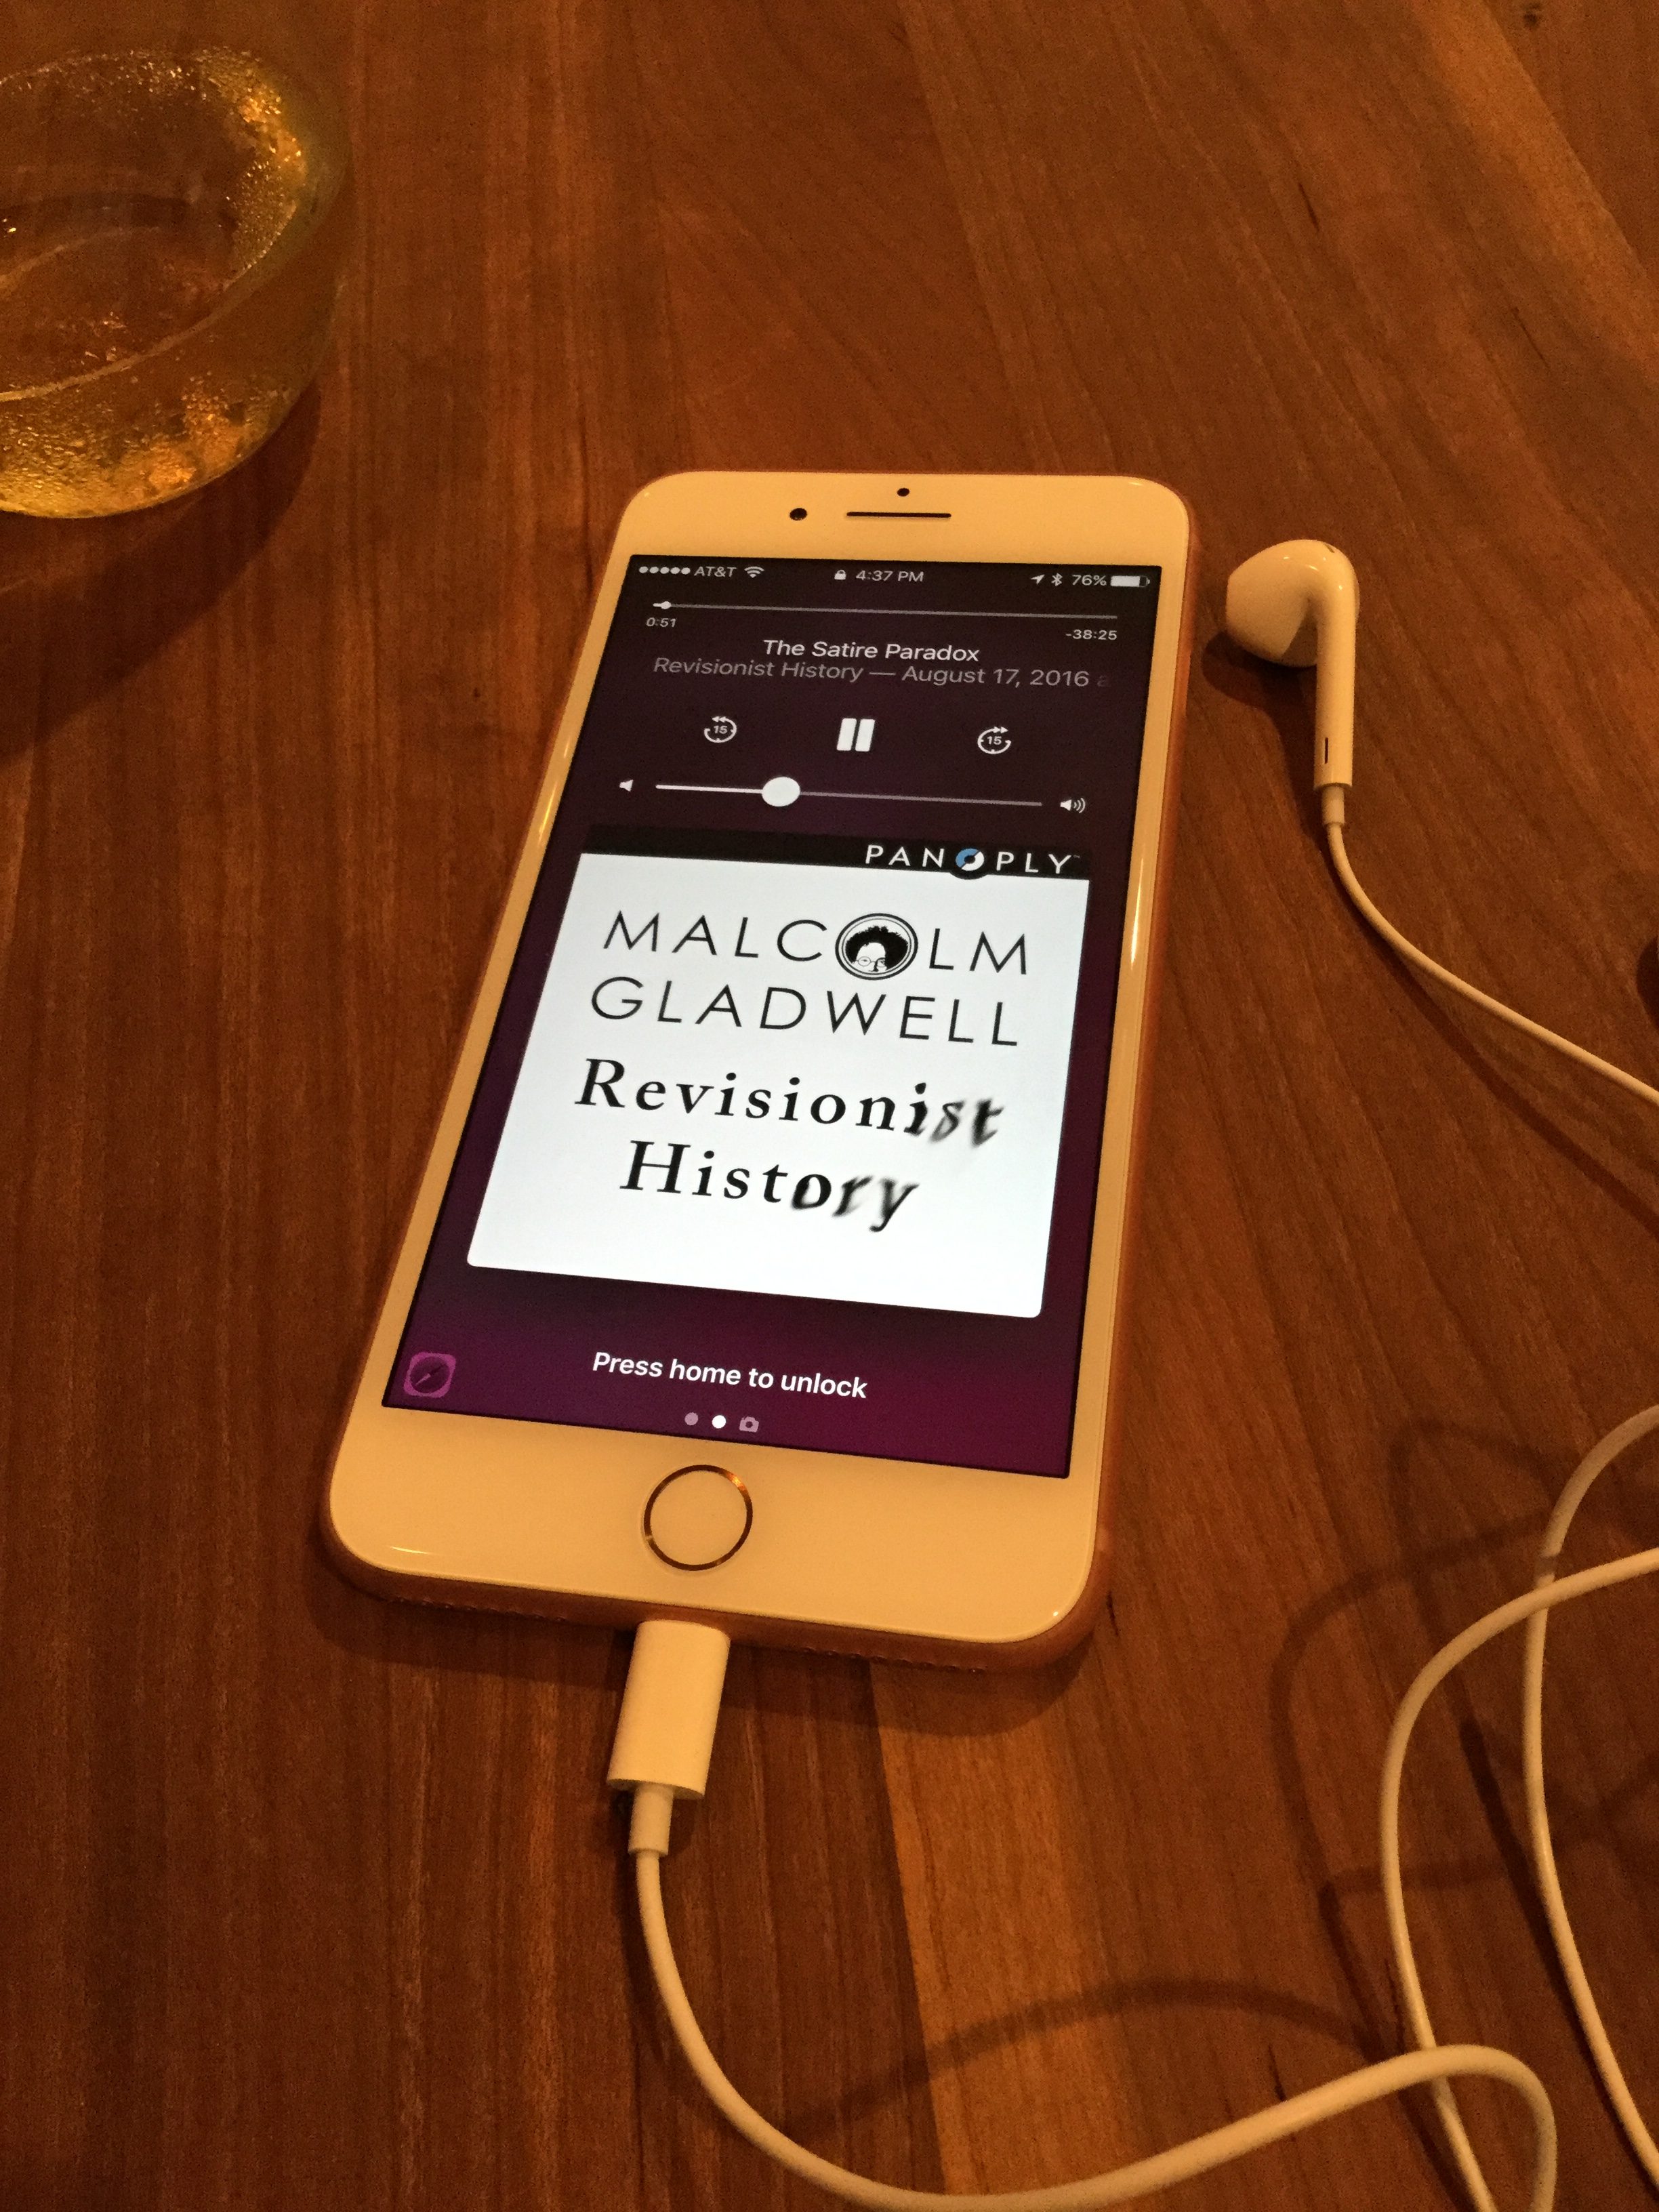 revisionist history podcast playing on an iphone 7 plus